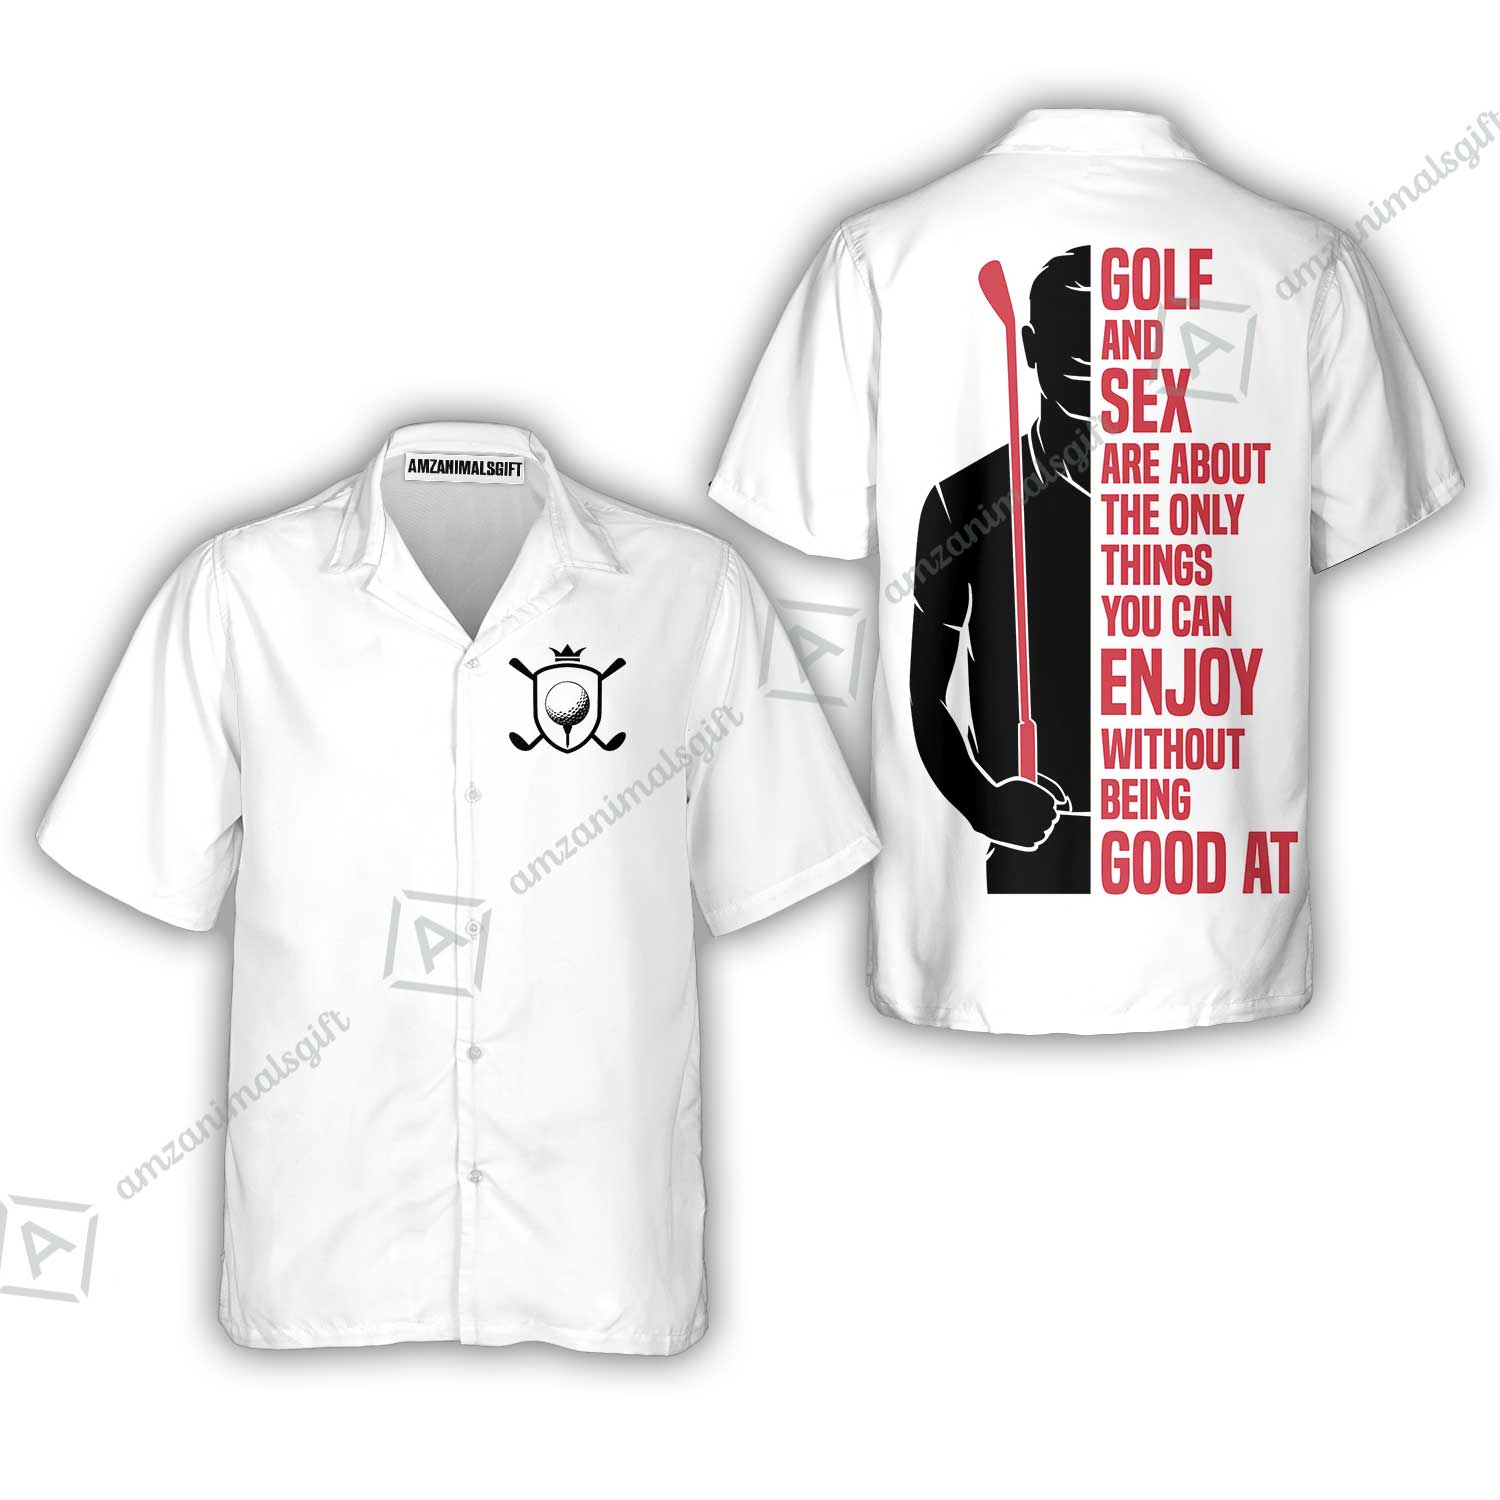 Golf Hawaiian Shirt - Golf And Sex Are About The Only Things You Can Enjoy Without Being Good At Polo Shirt,True Golf Hawaiian Shirt